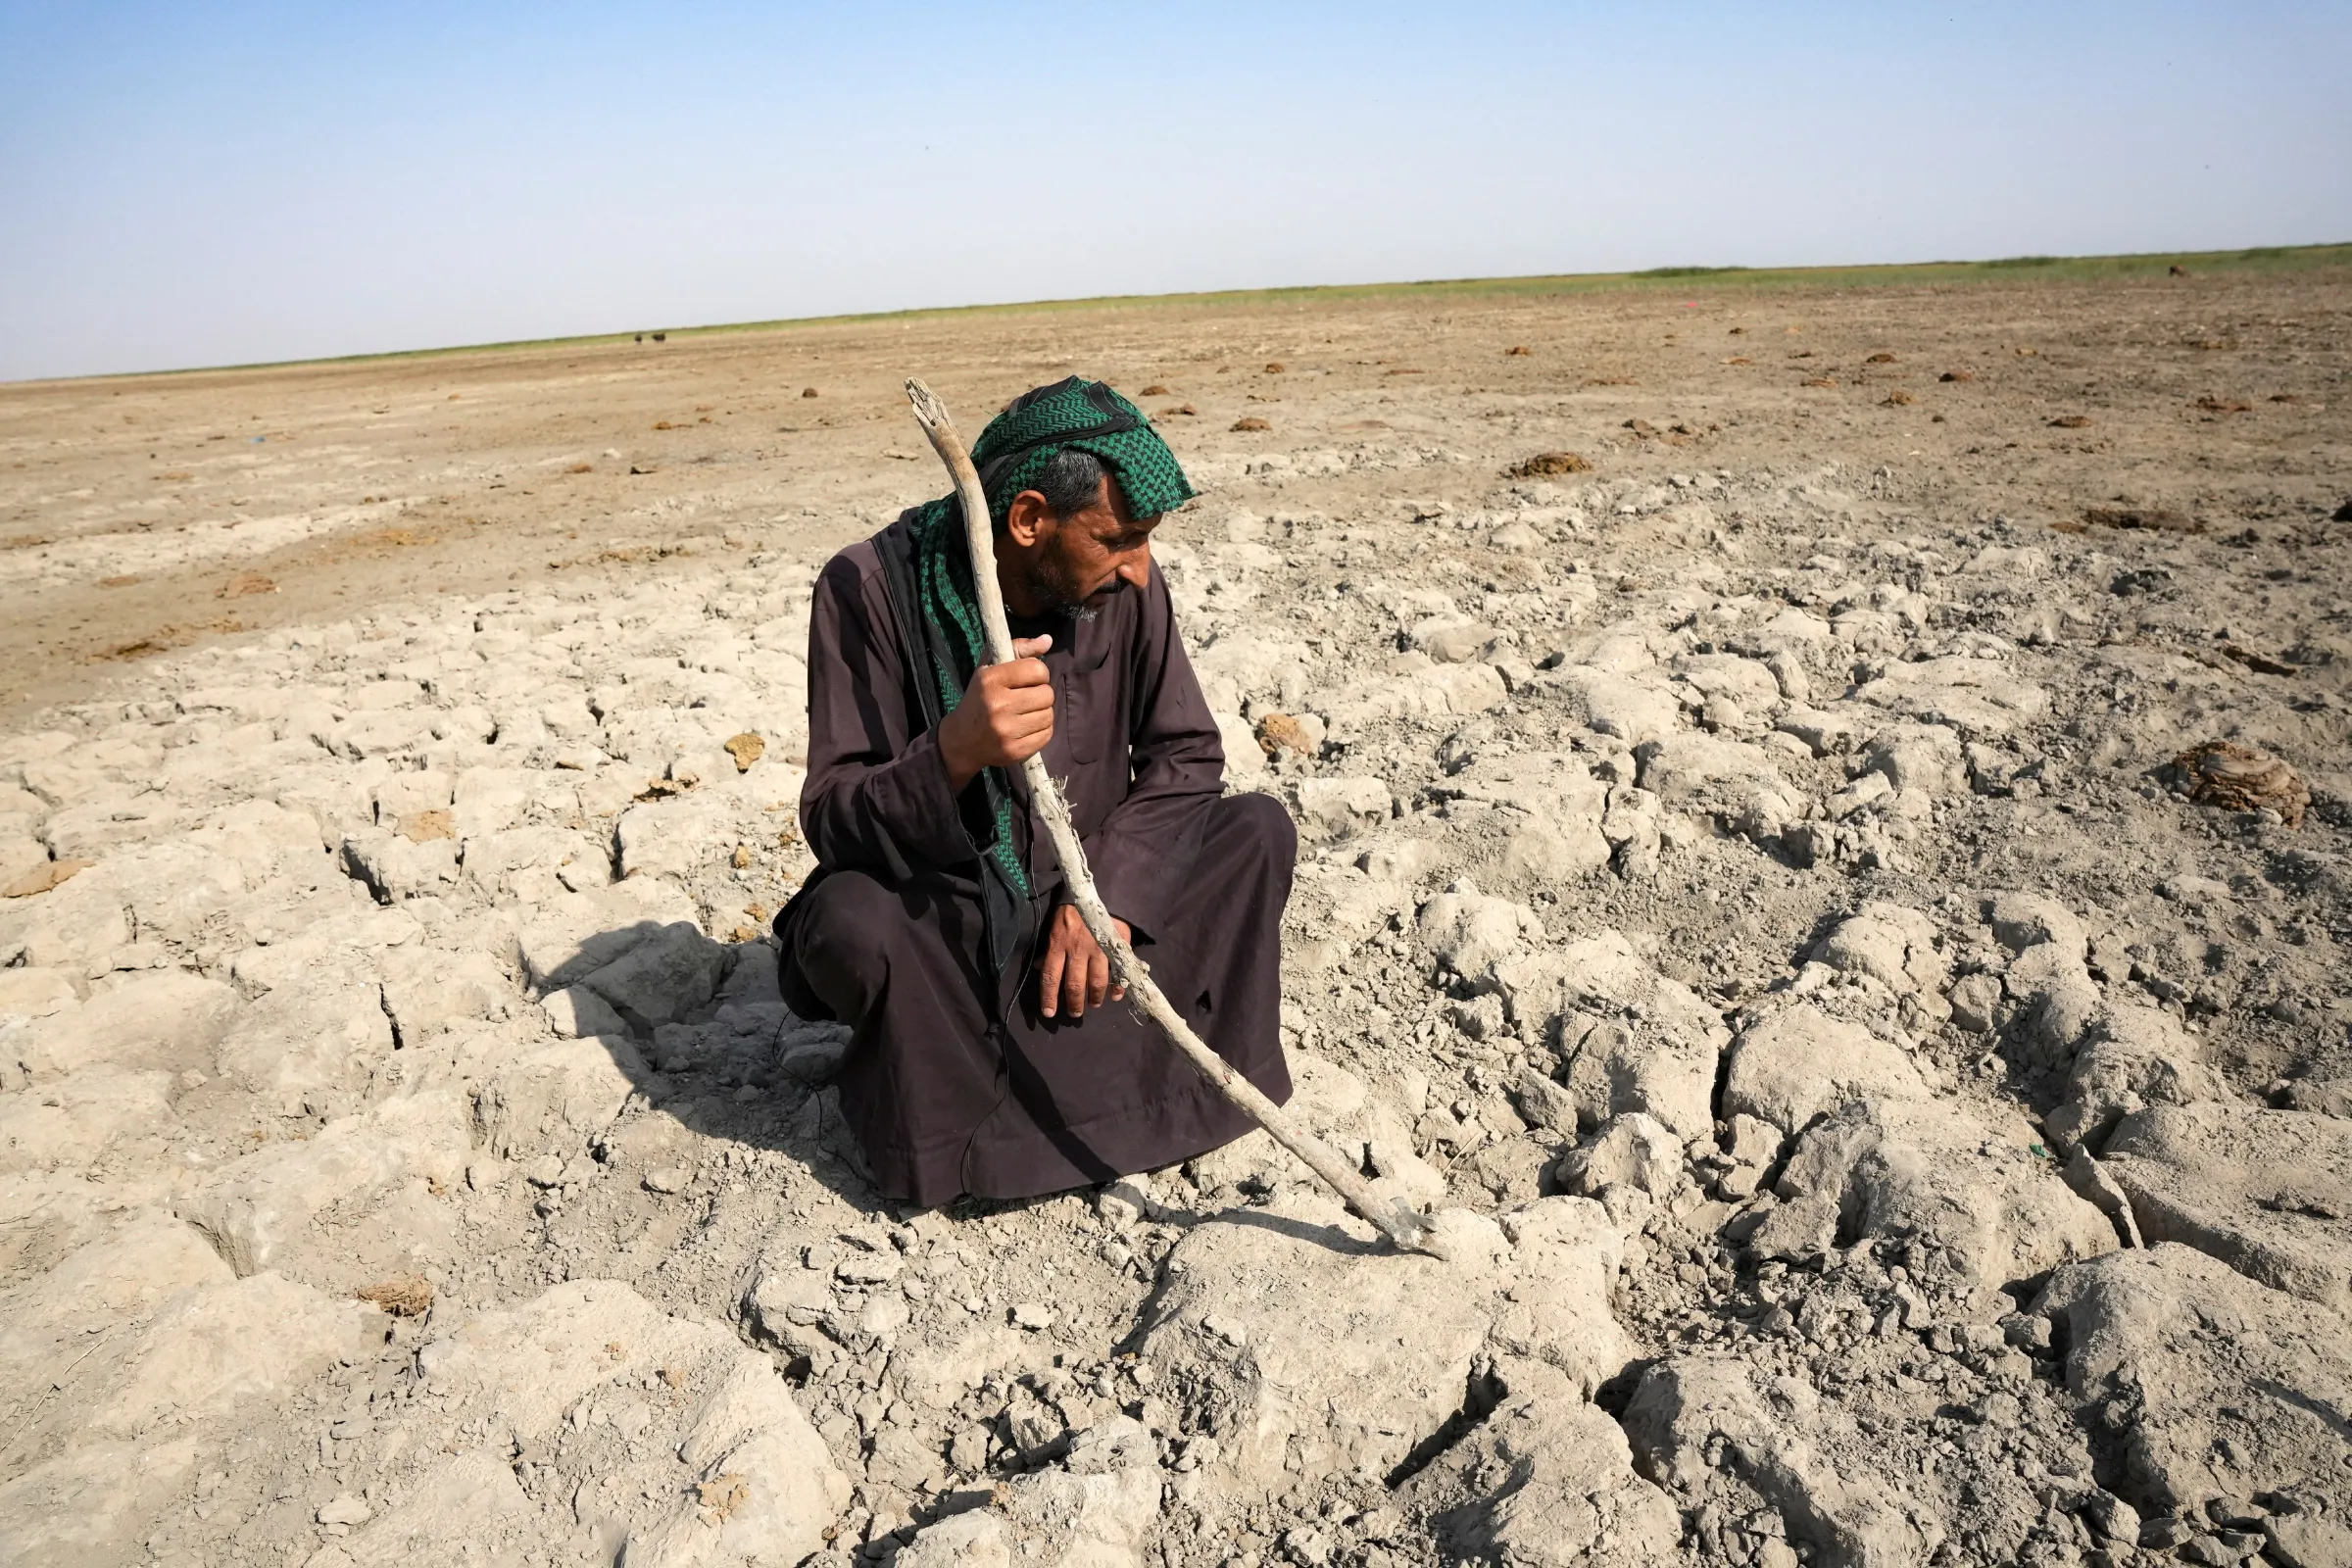 An Iraqi Marsh Arab man looks at dry ground that was previously covered with water at the Chebayesh marsh in Dhi Qar province, Iraq, June 3, 2022.